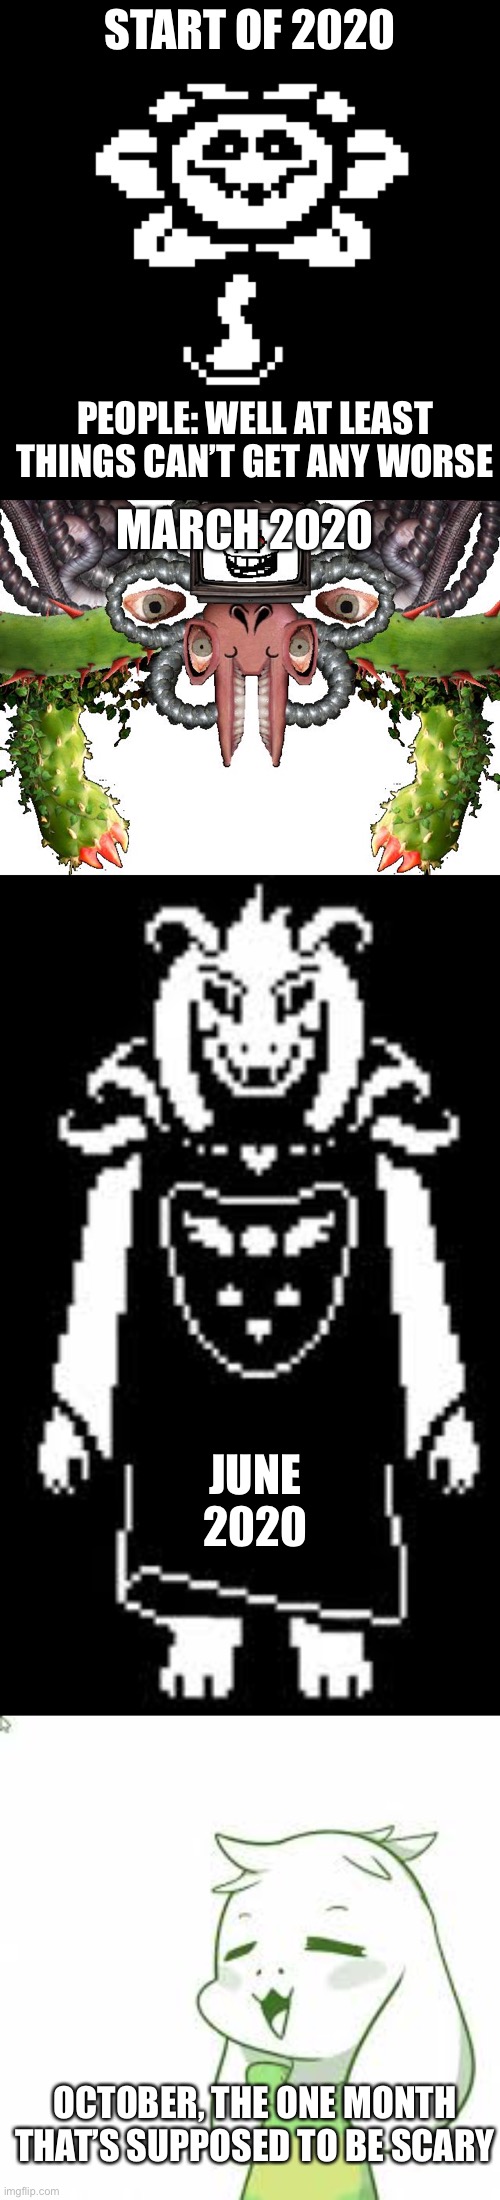 START OF 2020; PEOPLE: WELL AT LEAST THINGS CAN’T GET ANY WORSE; MARCH 2020; JUNE 2020; OCTOBER, THE ONE MONTH THAT’S SUPPOSED TO BE SCARY | image tagged in asriel memeurr,omega flowey,evil flowey,asriel | made w/ Imgflip meme maker